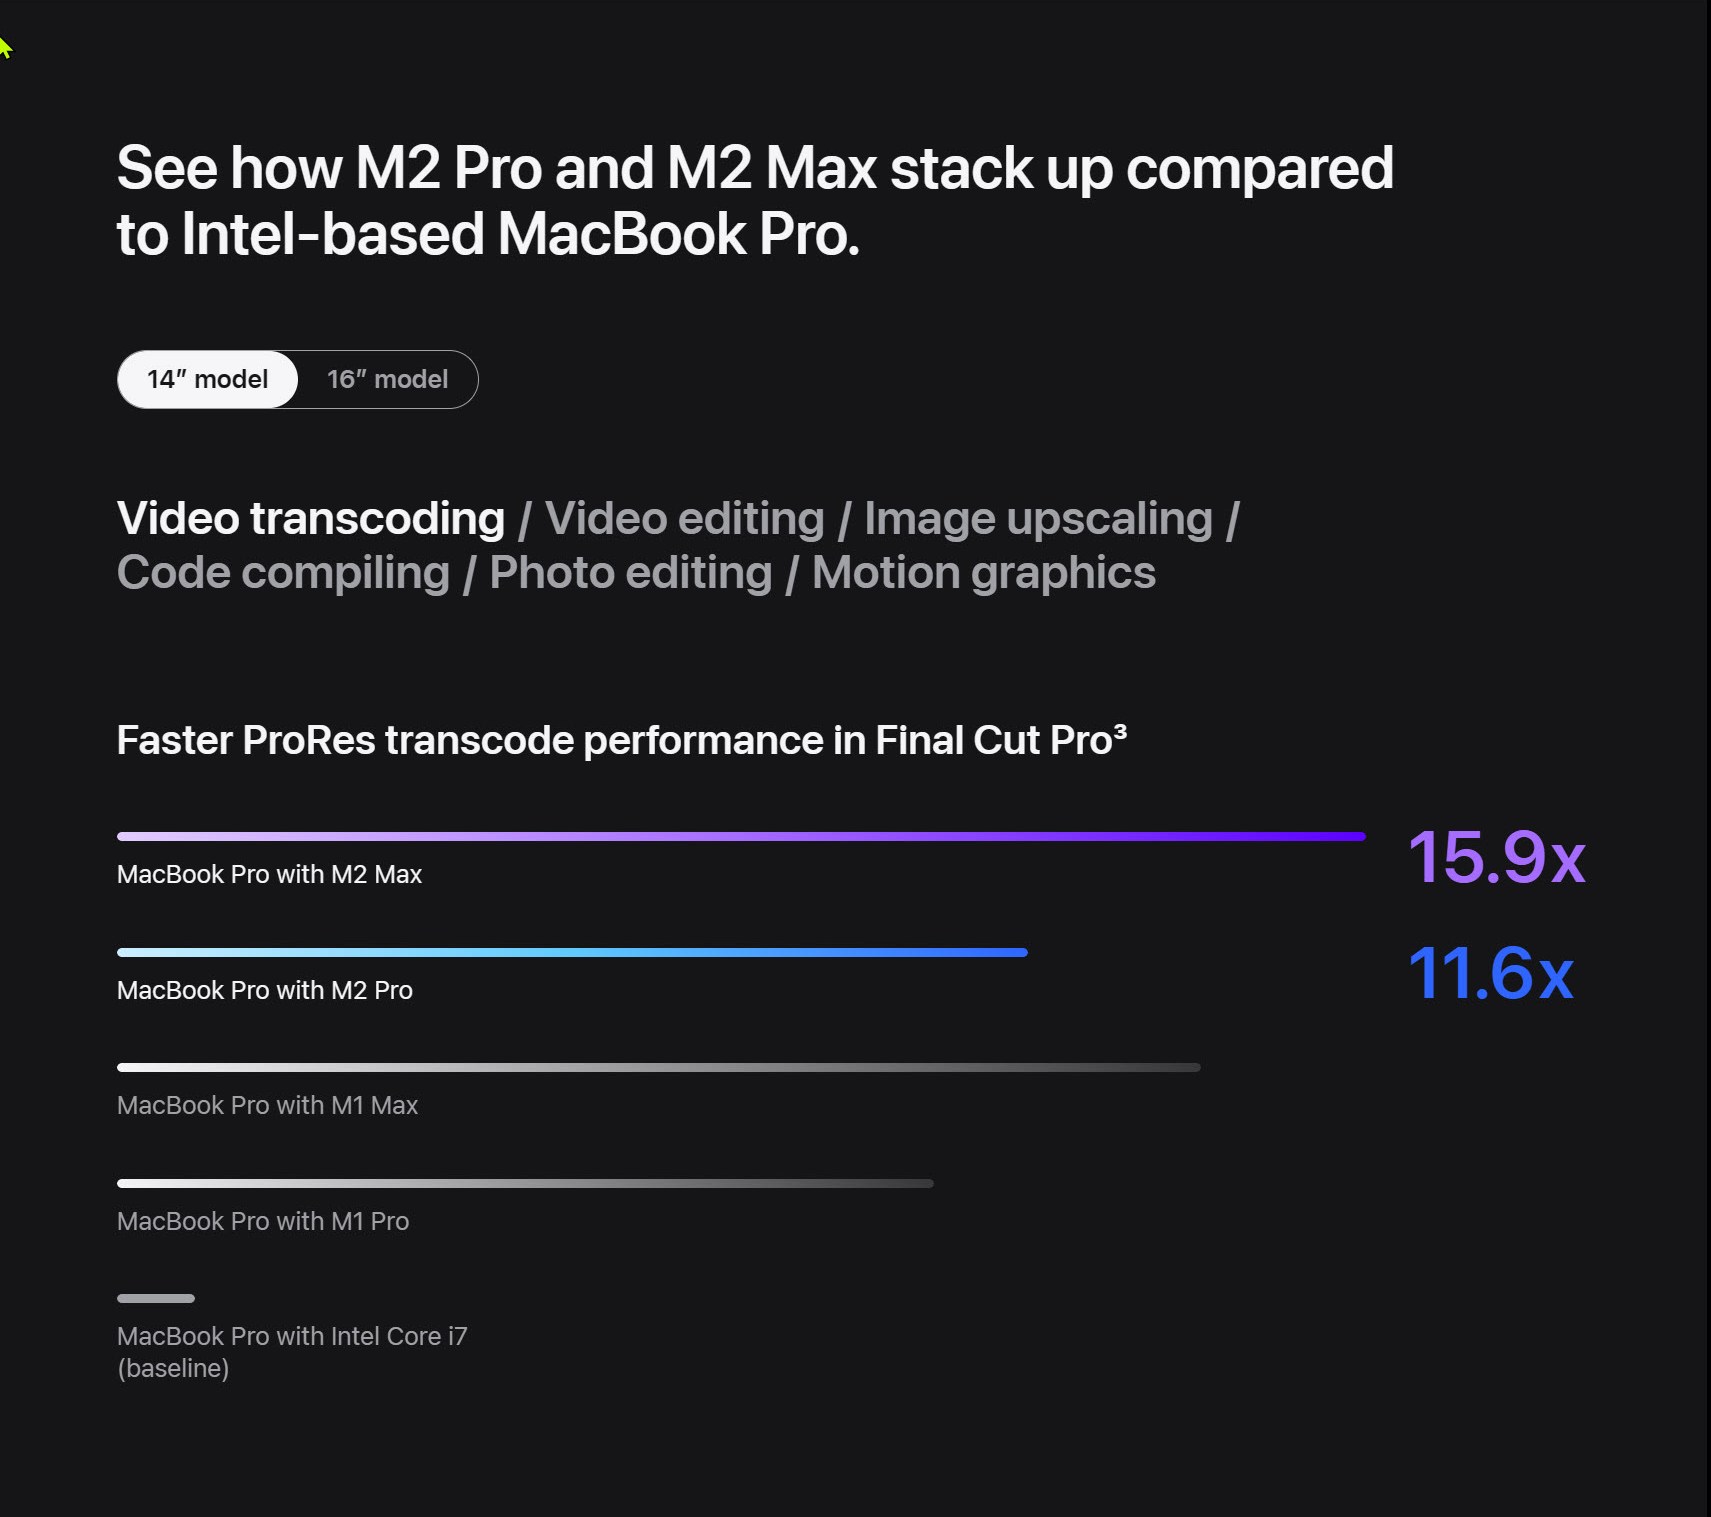 Intel has a faster processor than M2 Max, but at what cost?